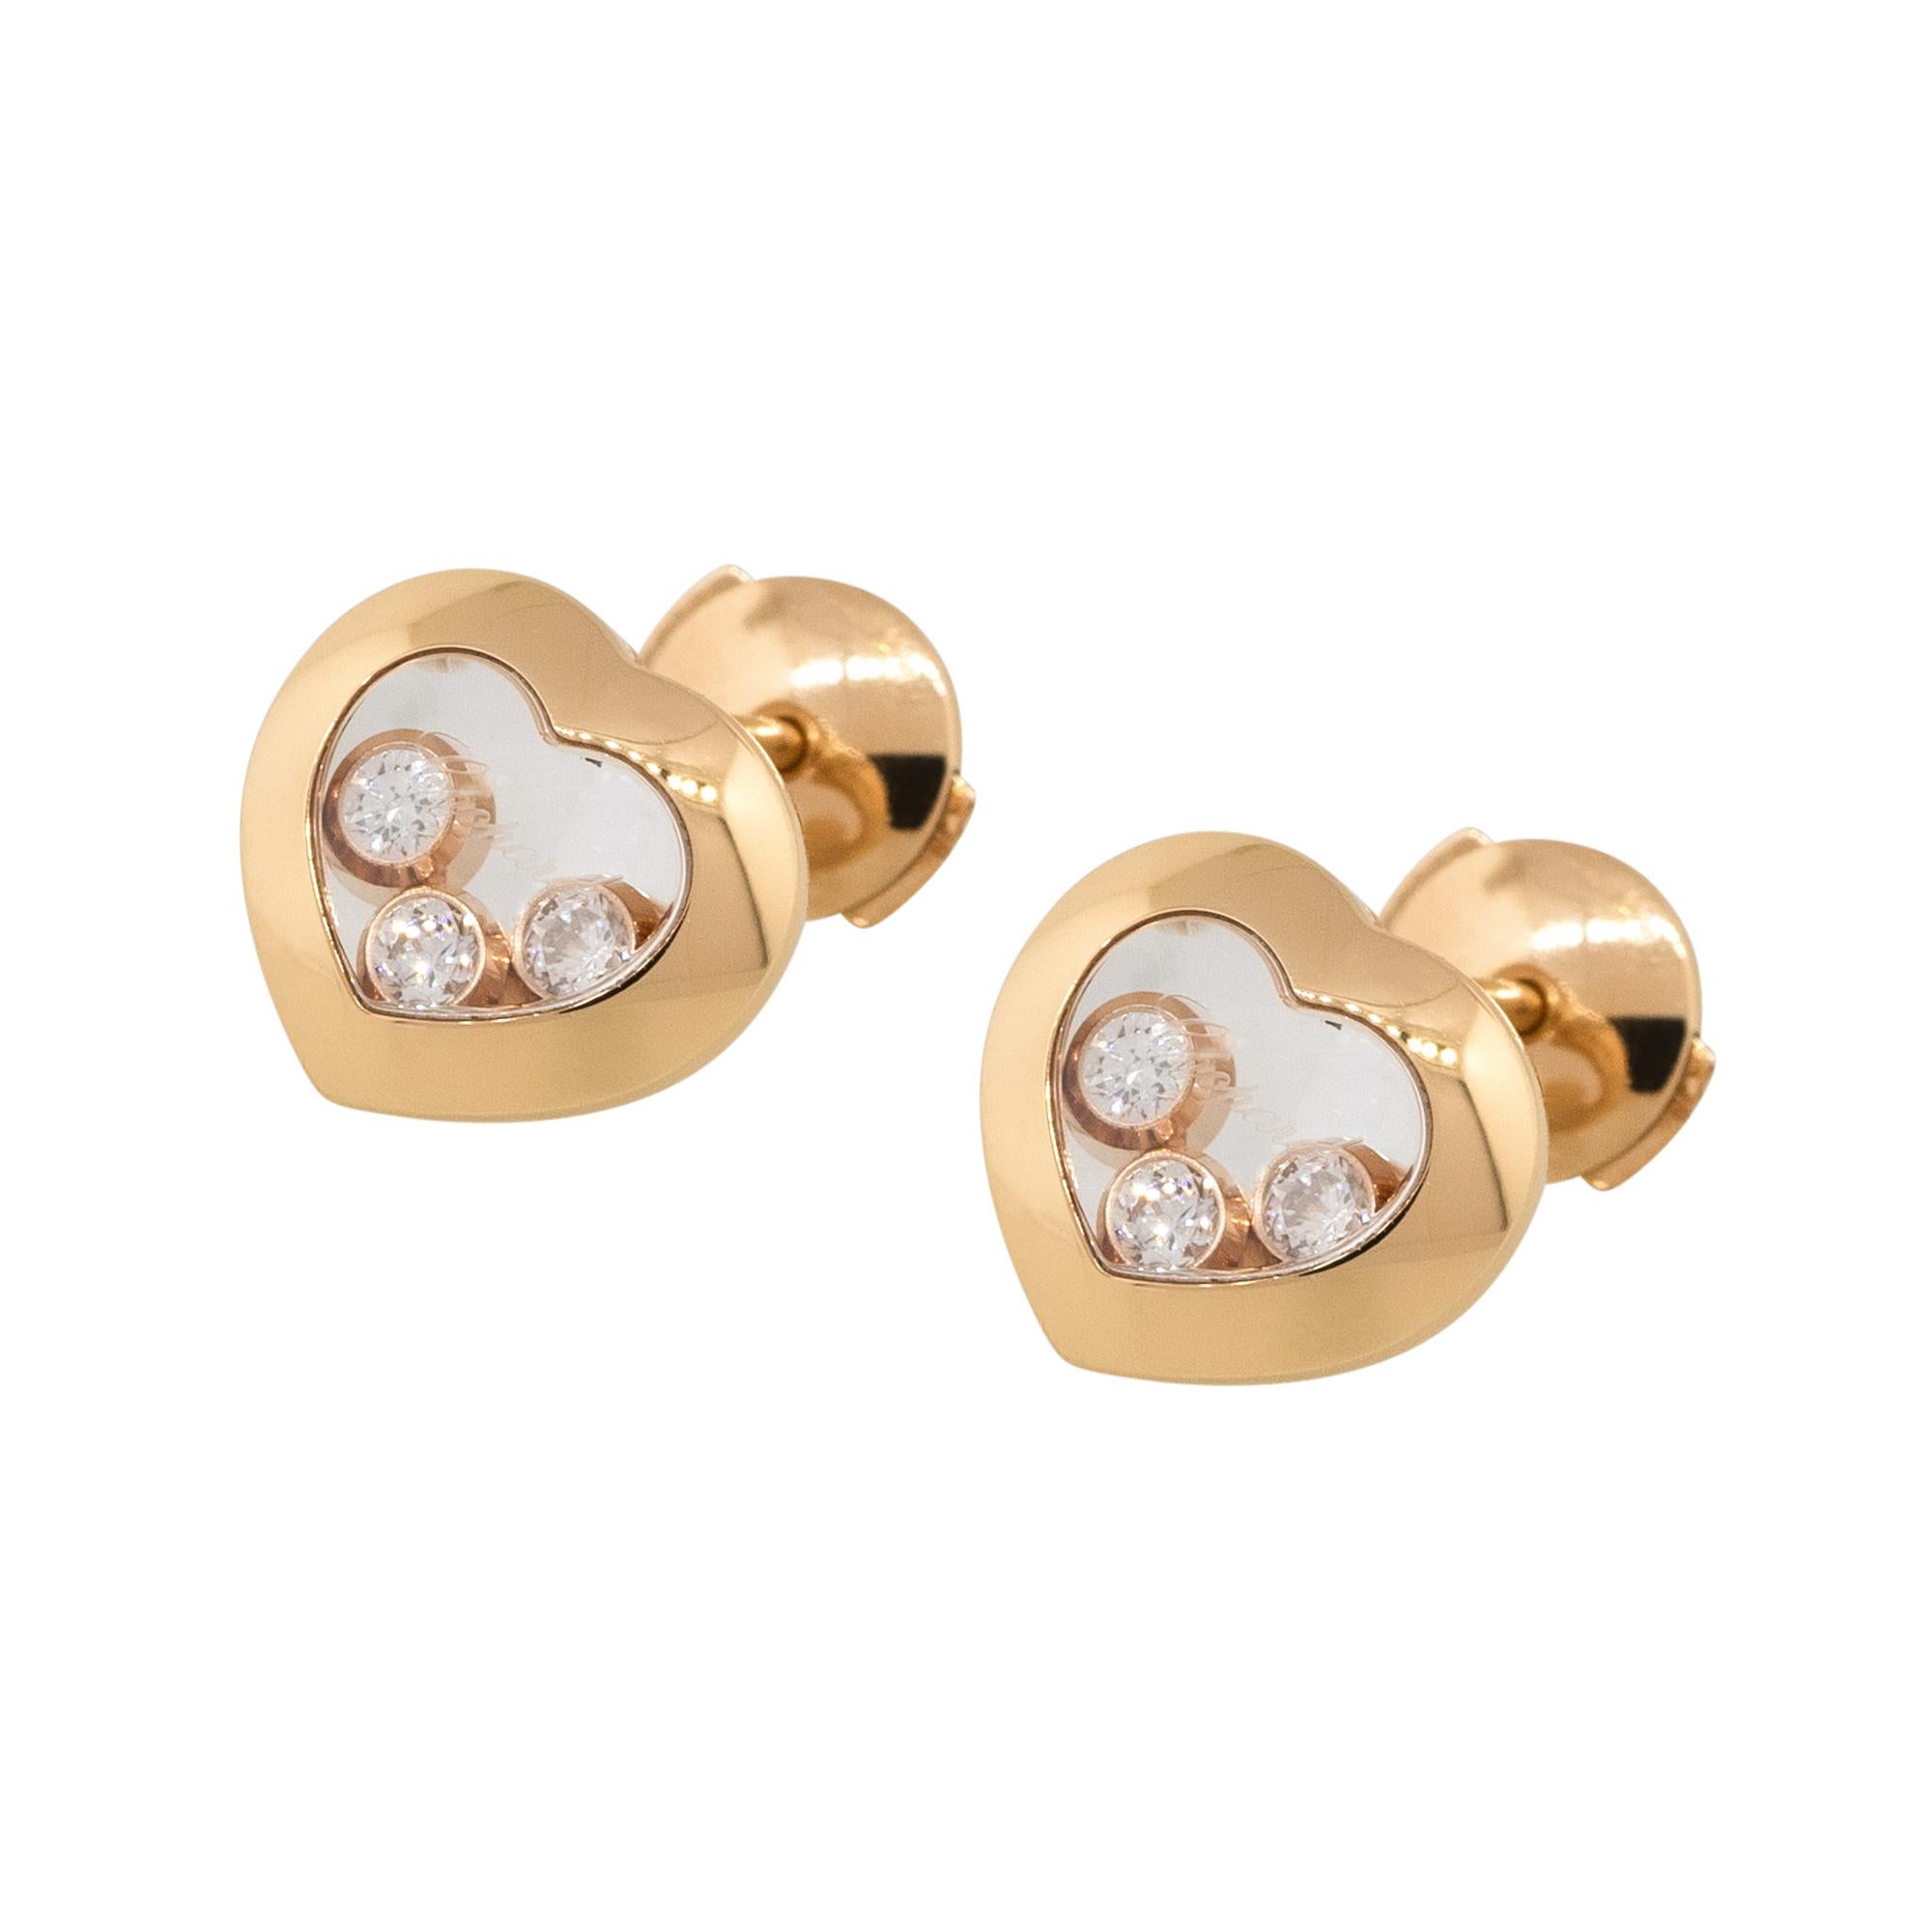 Designer: Chopard
Material: 18k Rose Gold
Diamond Details: Approx. 0.30ctw of round Diamonds. Diamonds are G/H in color and VS in clarity
Measurements: 12.3mm x 9.4mm x 10.2mm
Earrings Backs: Tension posts
Total Weight: 5.2g (3.3dwt) 
Additional